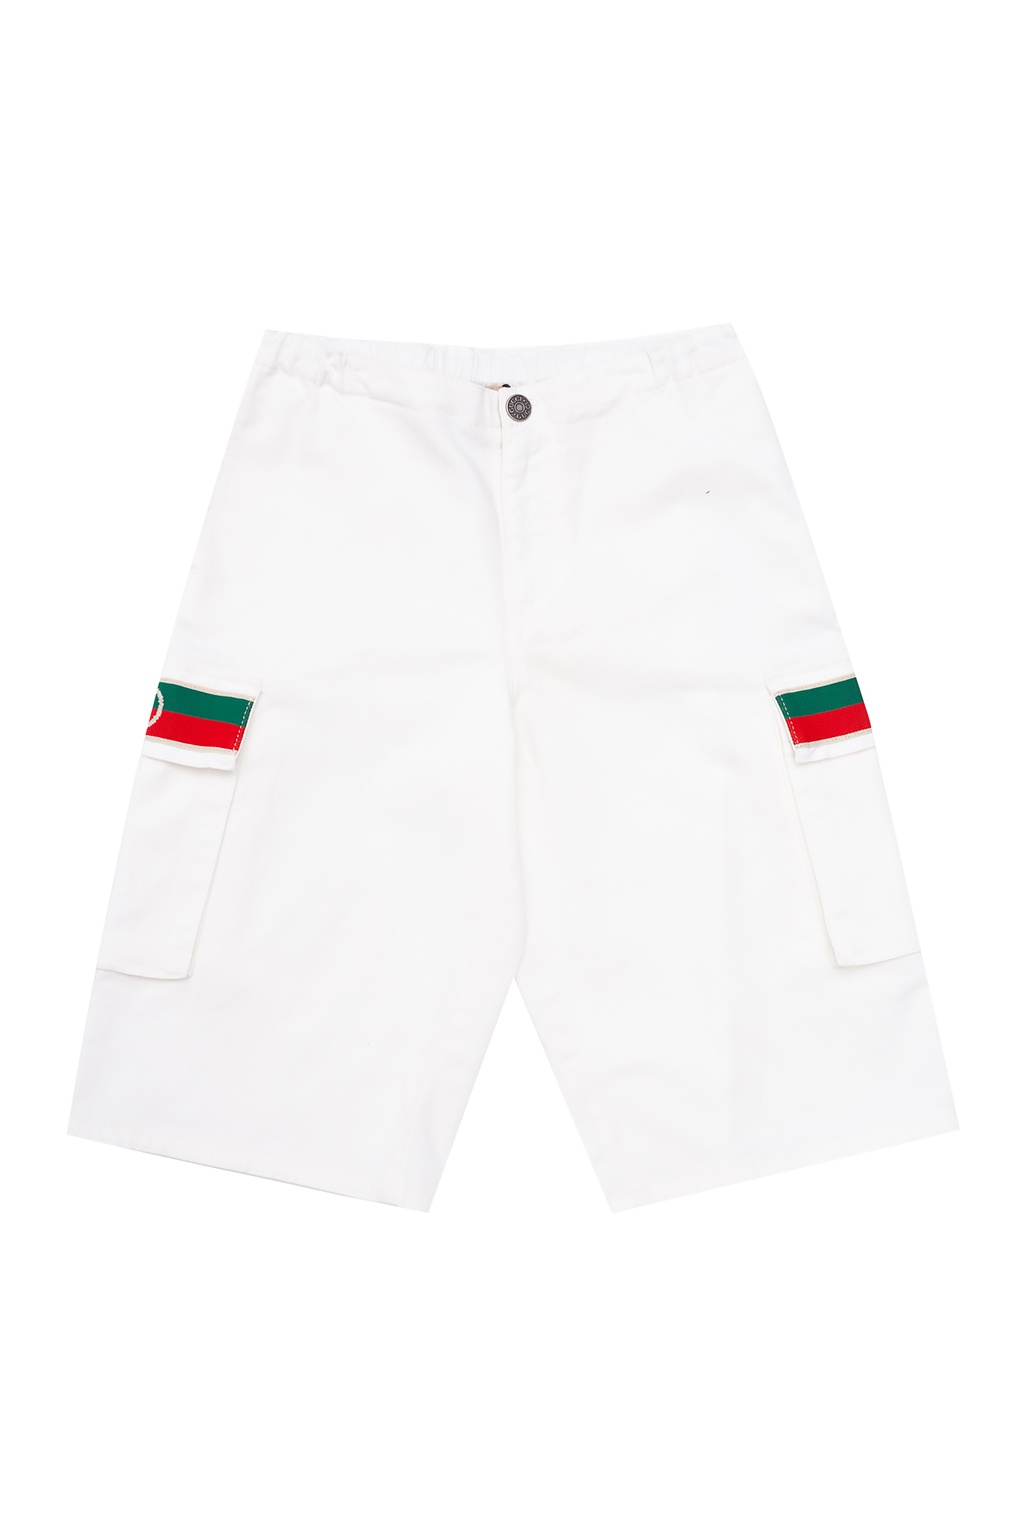 gucci shorts for boys